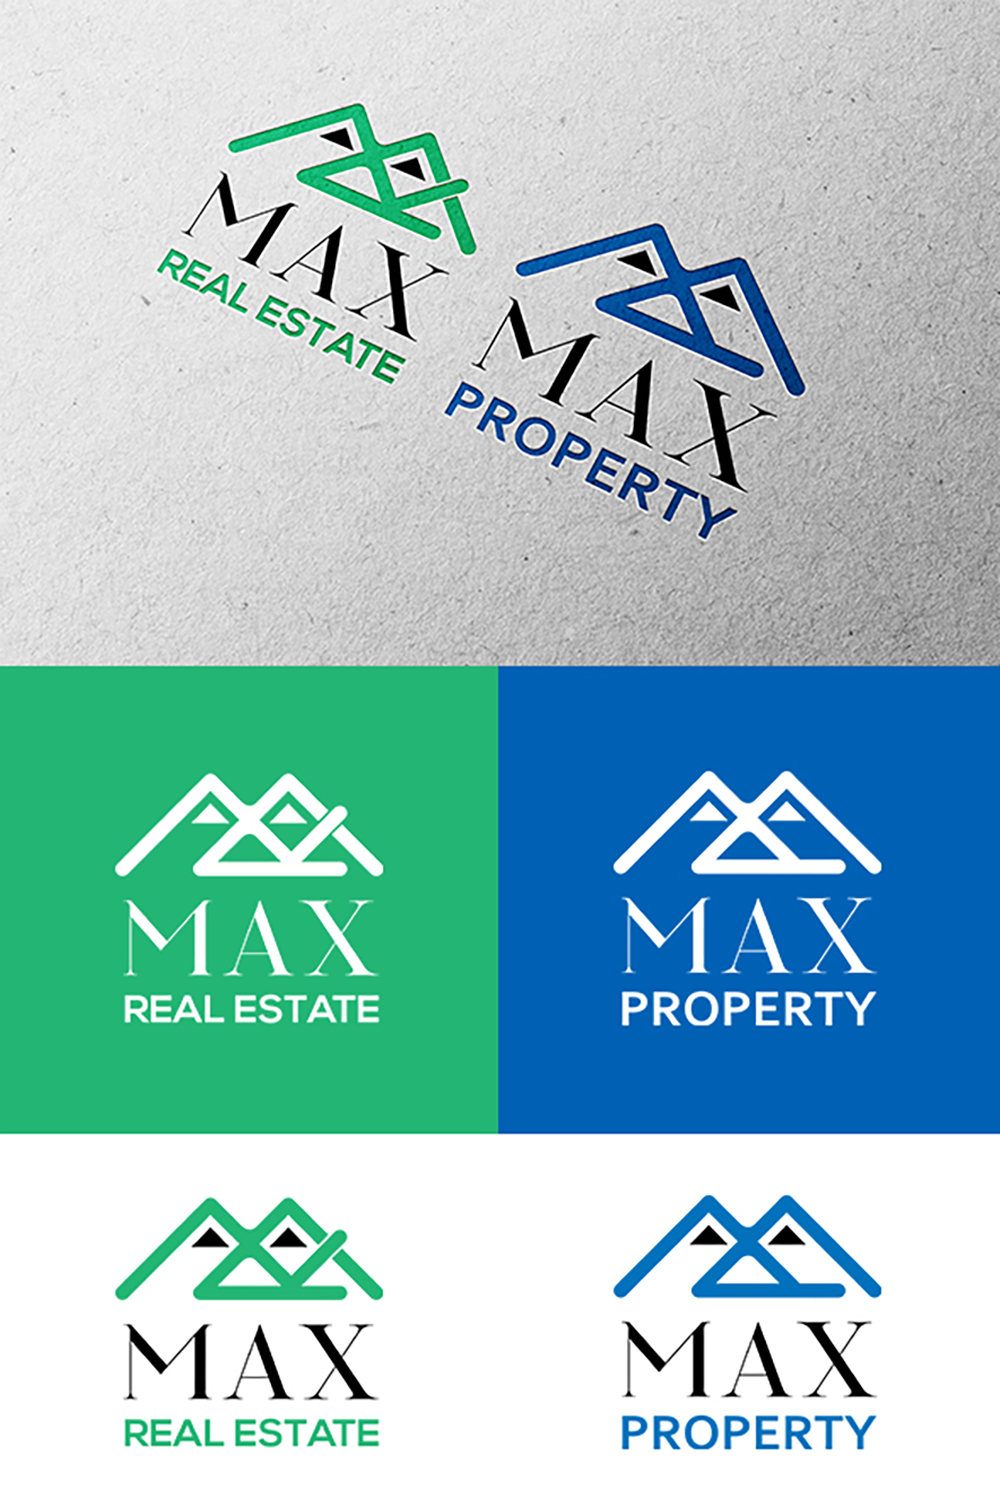 Property and Real Estate Company Logo Template 2 in 1 pinterest image.